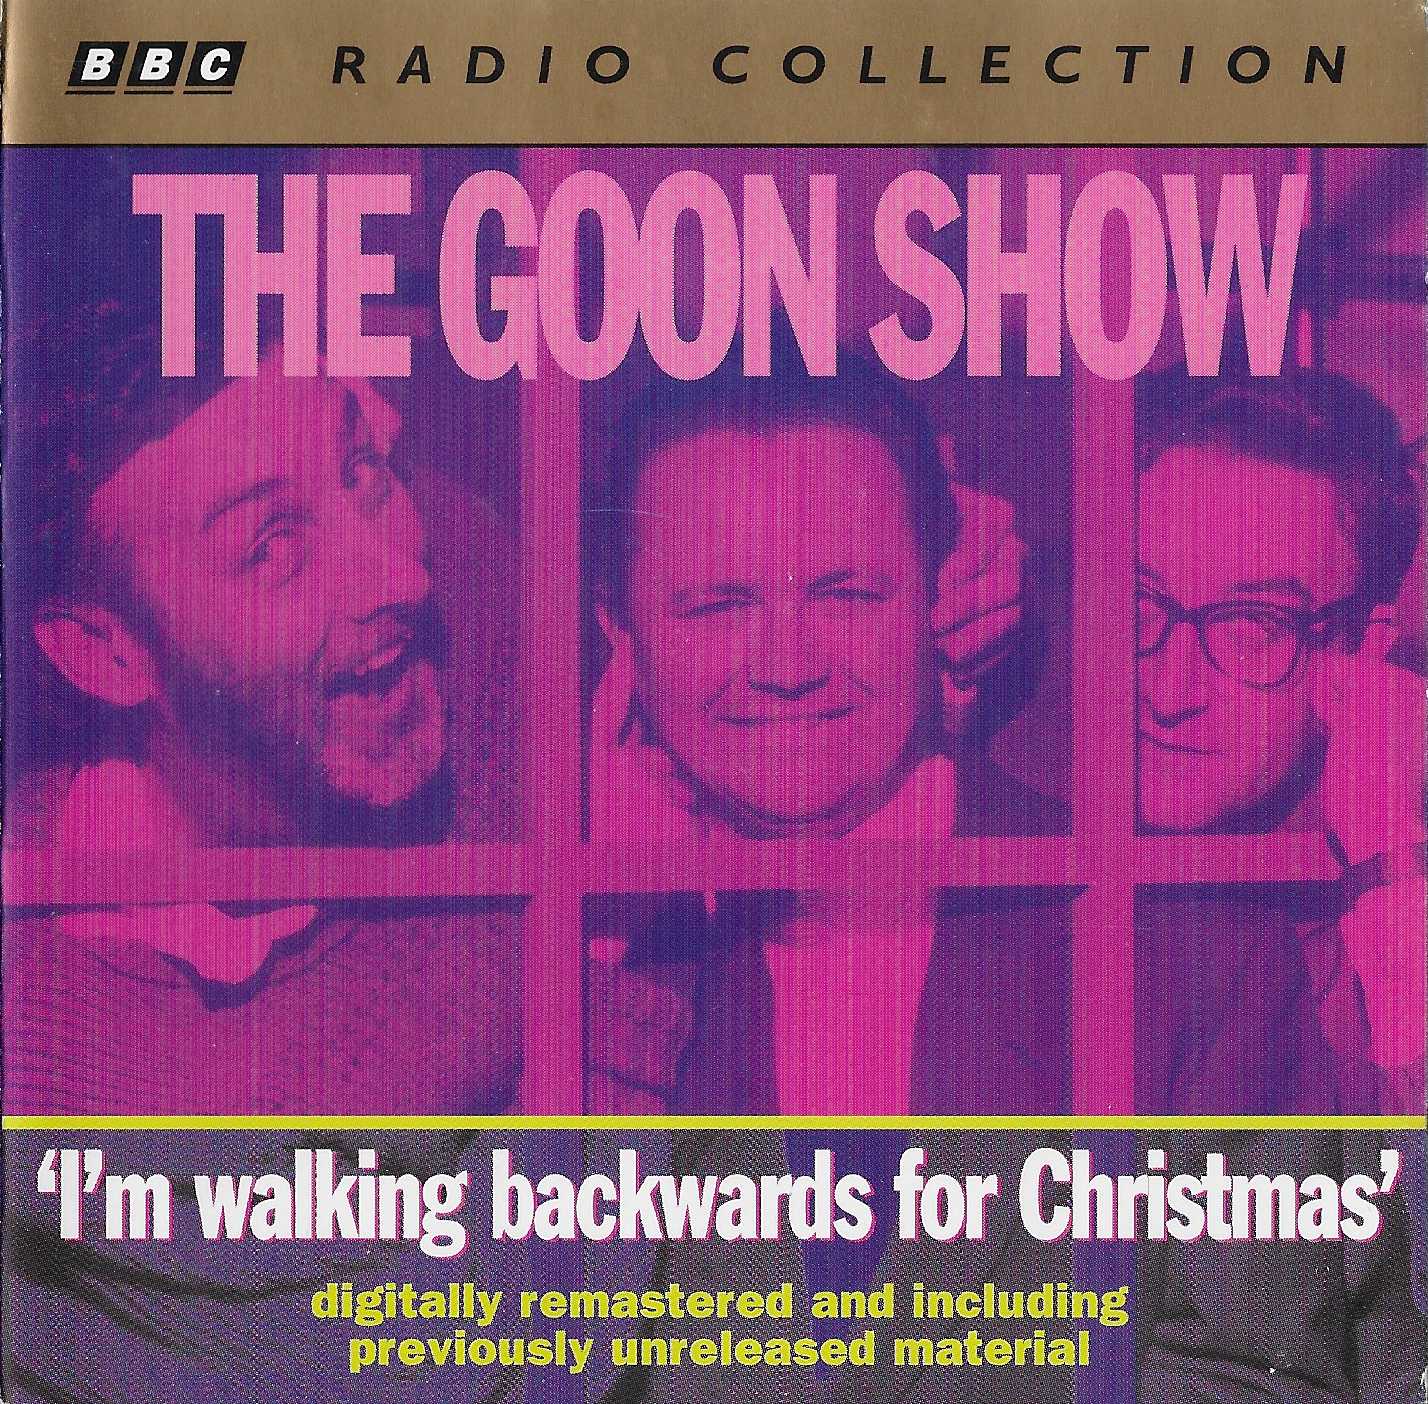 Picture of ZBBC 1866 CD The Goon show 3 - I'm walking backwards for Christmas by artist Spike Milligan / Larry Stephens from the BBC cds - Records and Tapes library